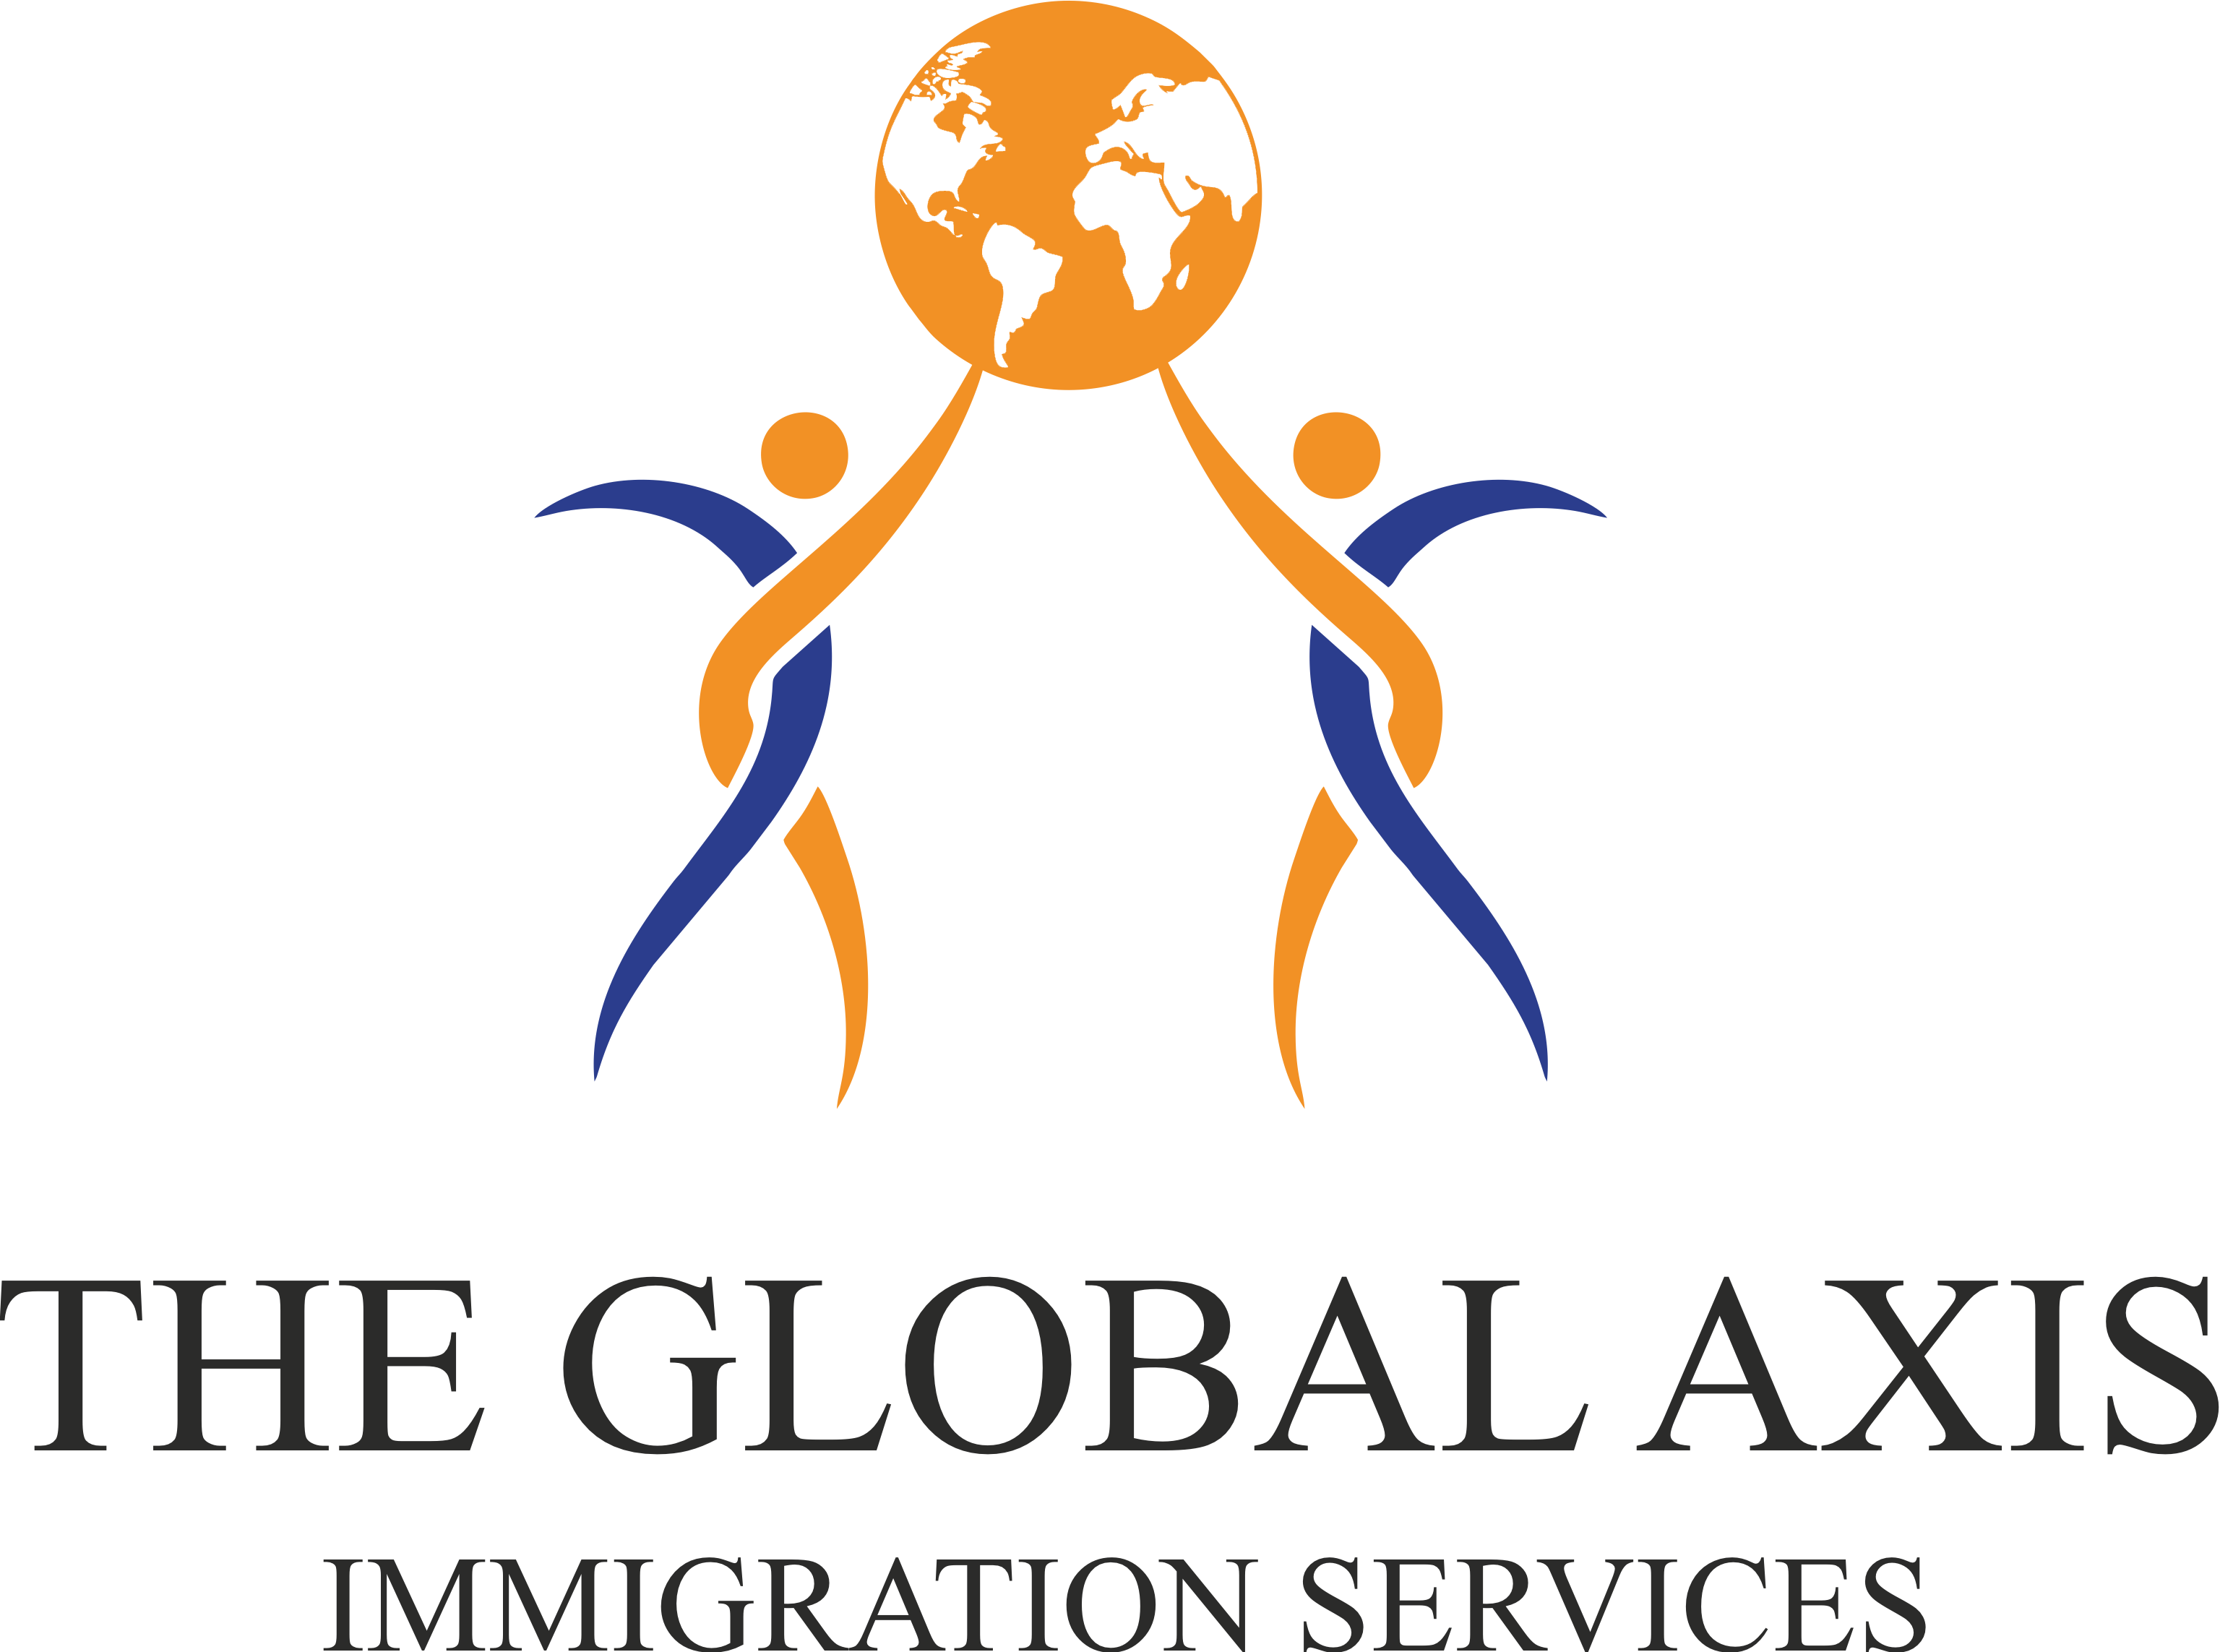 axis global travel